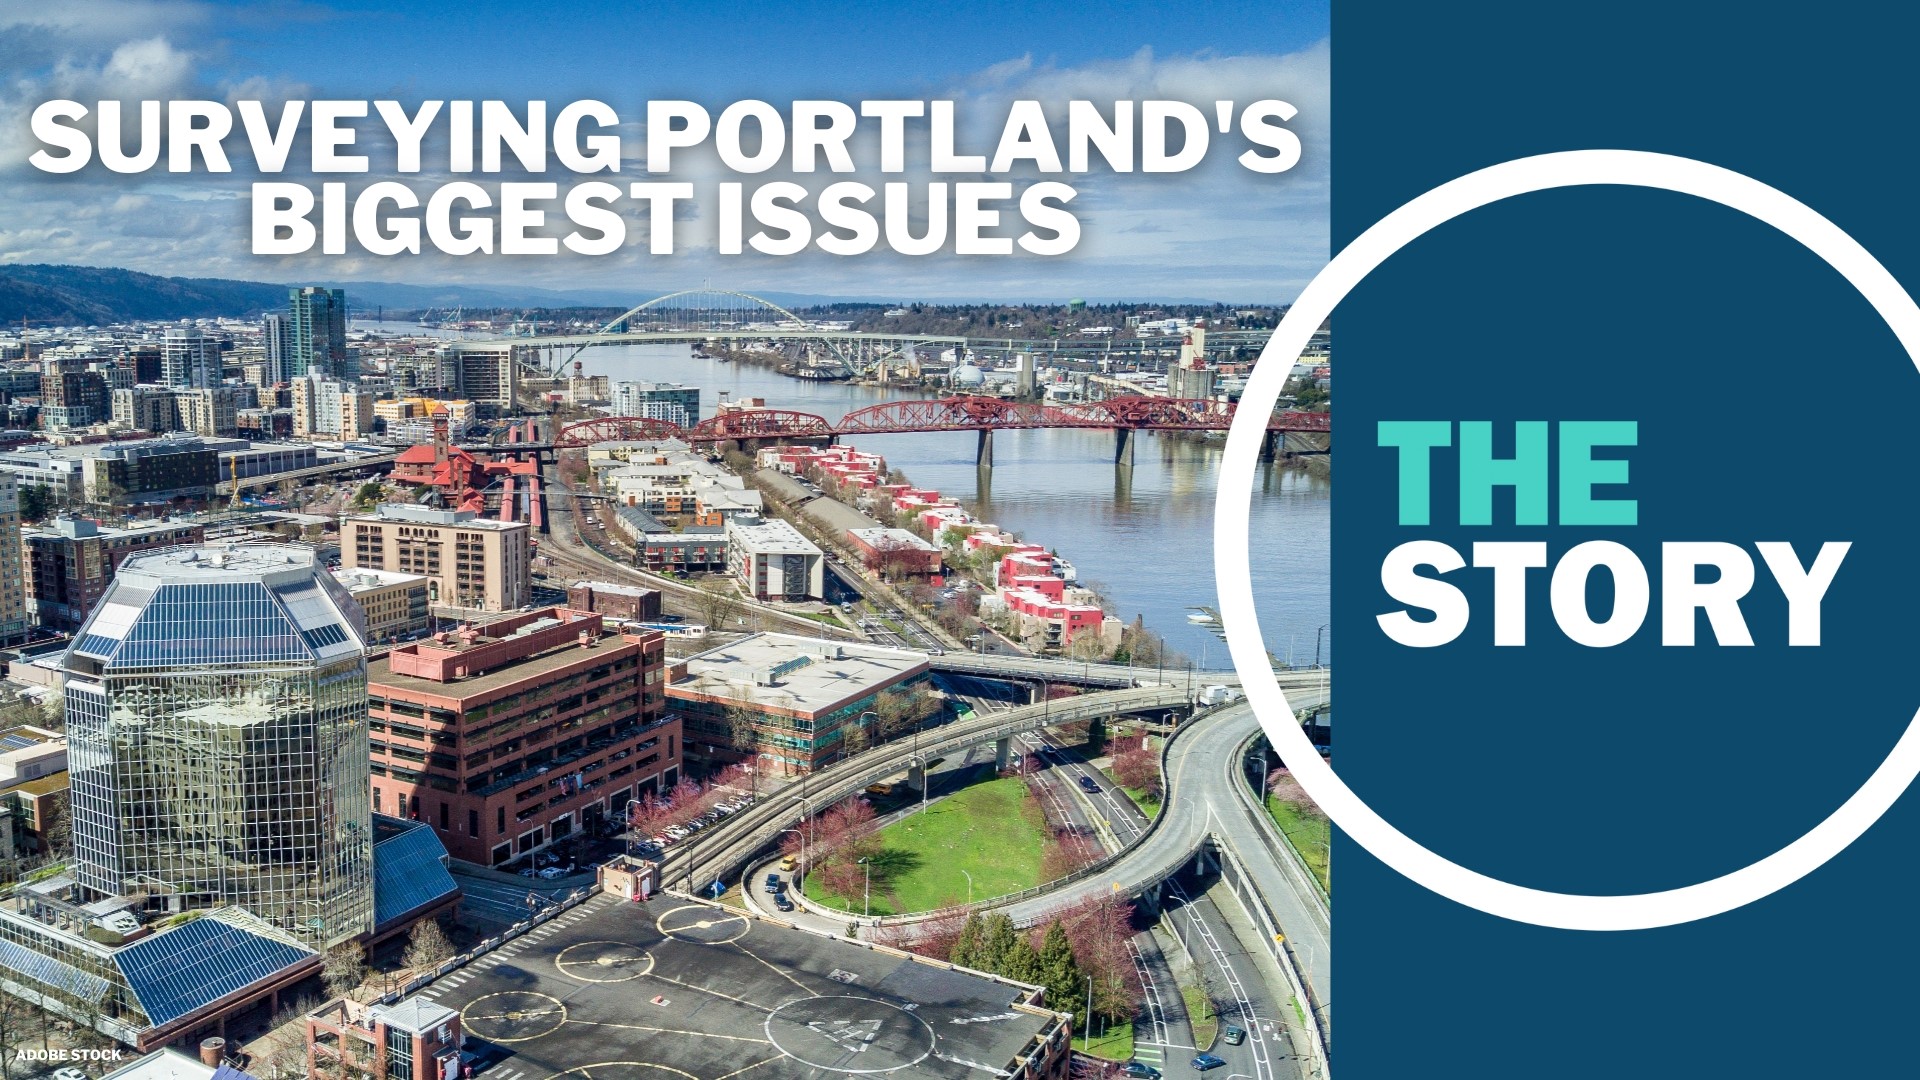 Homelessness emerged as the clear top concern for Portlanders in a recent survey, but it wasn't the primary reason cited by people who moved away.